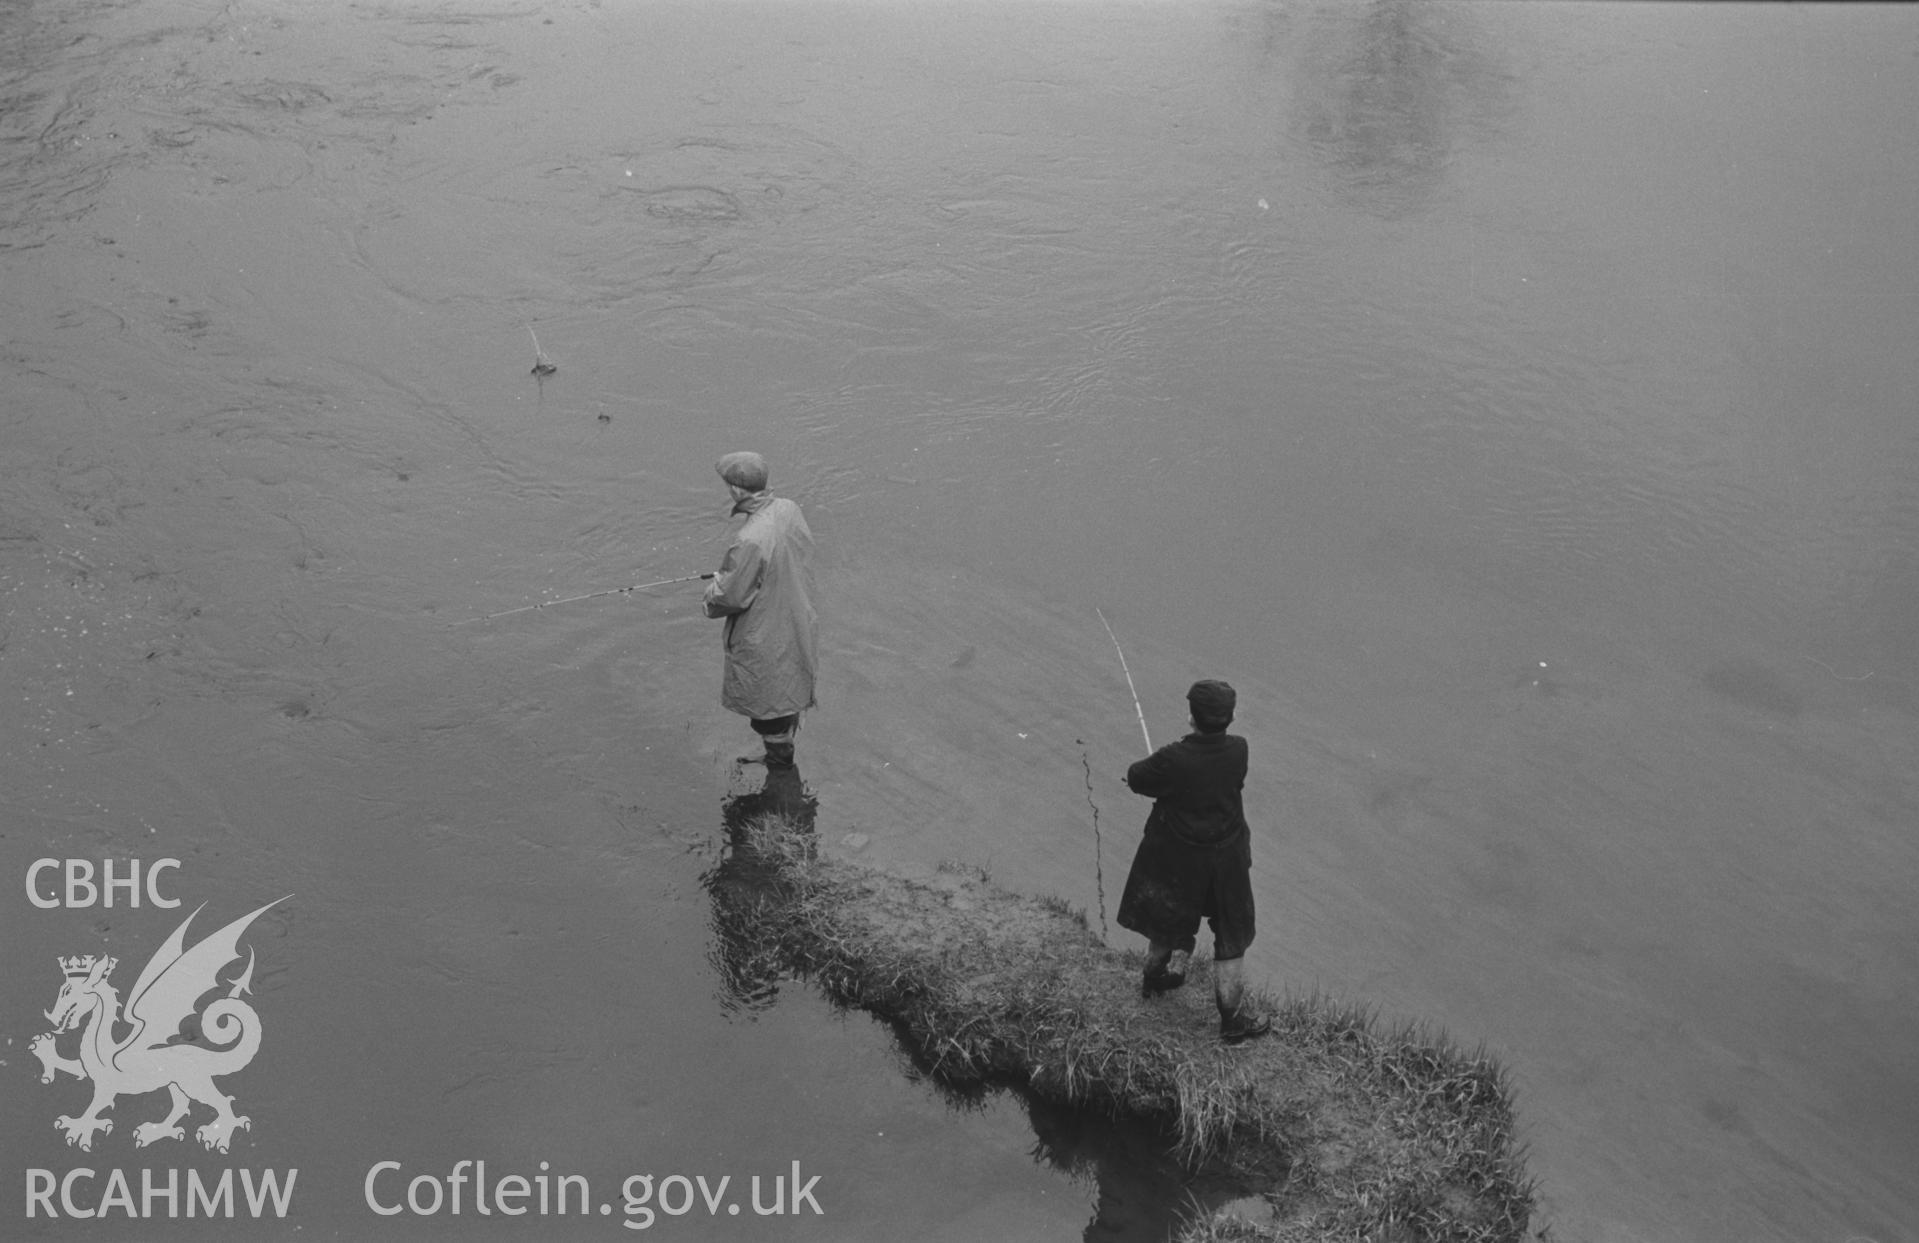 Black and White photograph showing two figures fishing in the Teifi below the bridge near Newcastle Emlyn. Photographed by Arthur Chater in April 1962 from Grid Reference SN 309 409, looking west.